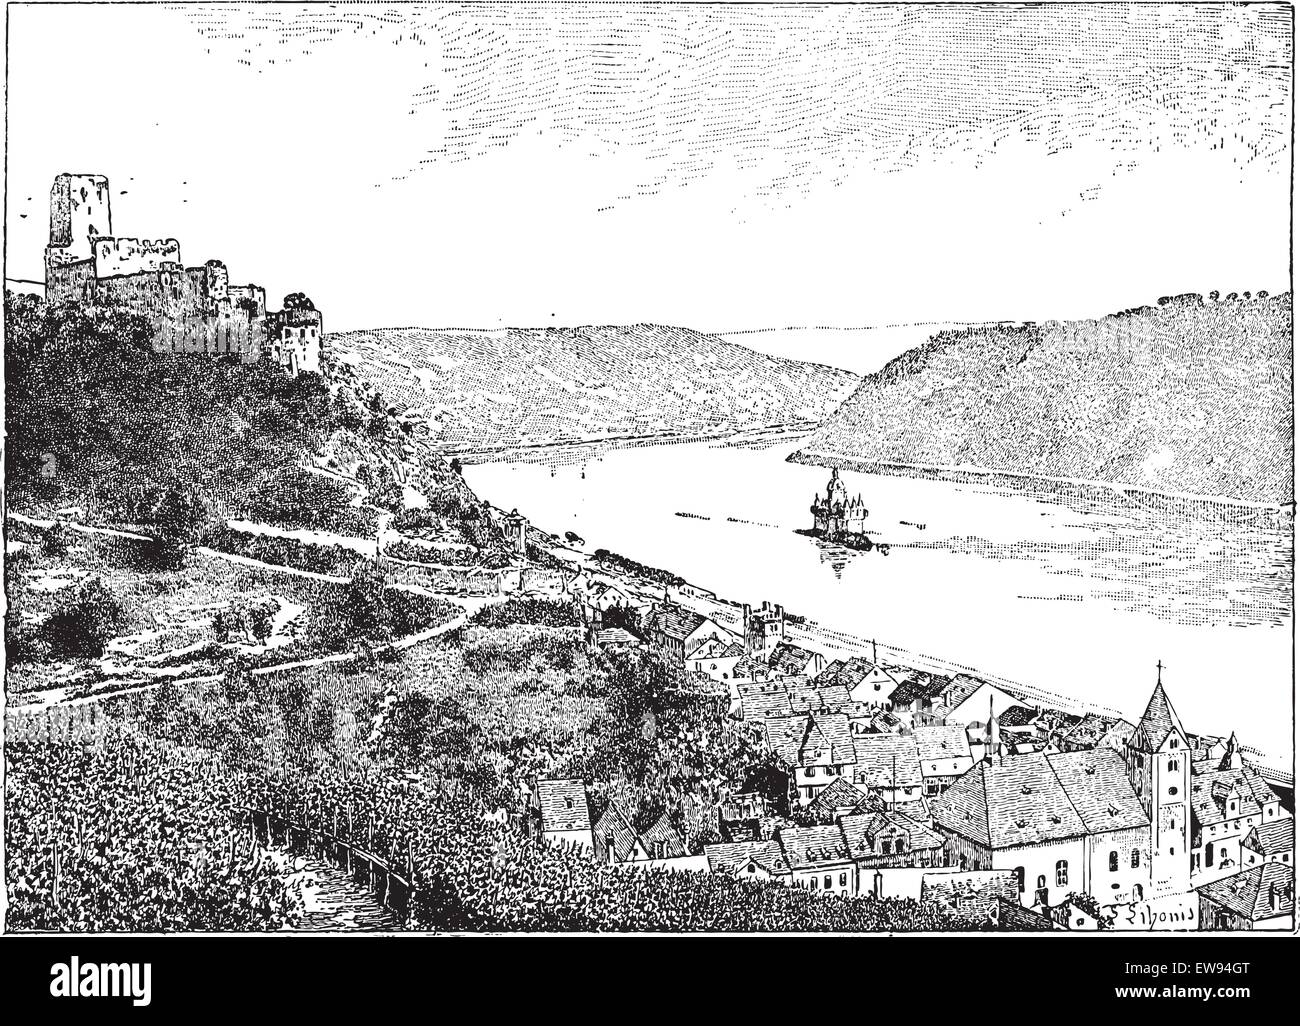 Burg Gutenfels, Rhin river, Germany, vintage engraved illustration. Dictionary of words and things - Larive and Fleury - 1895. Stock Vector